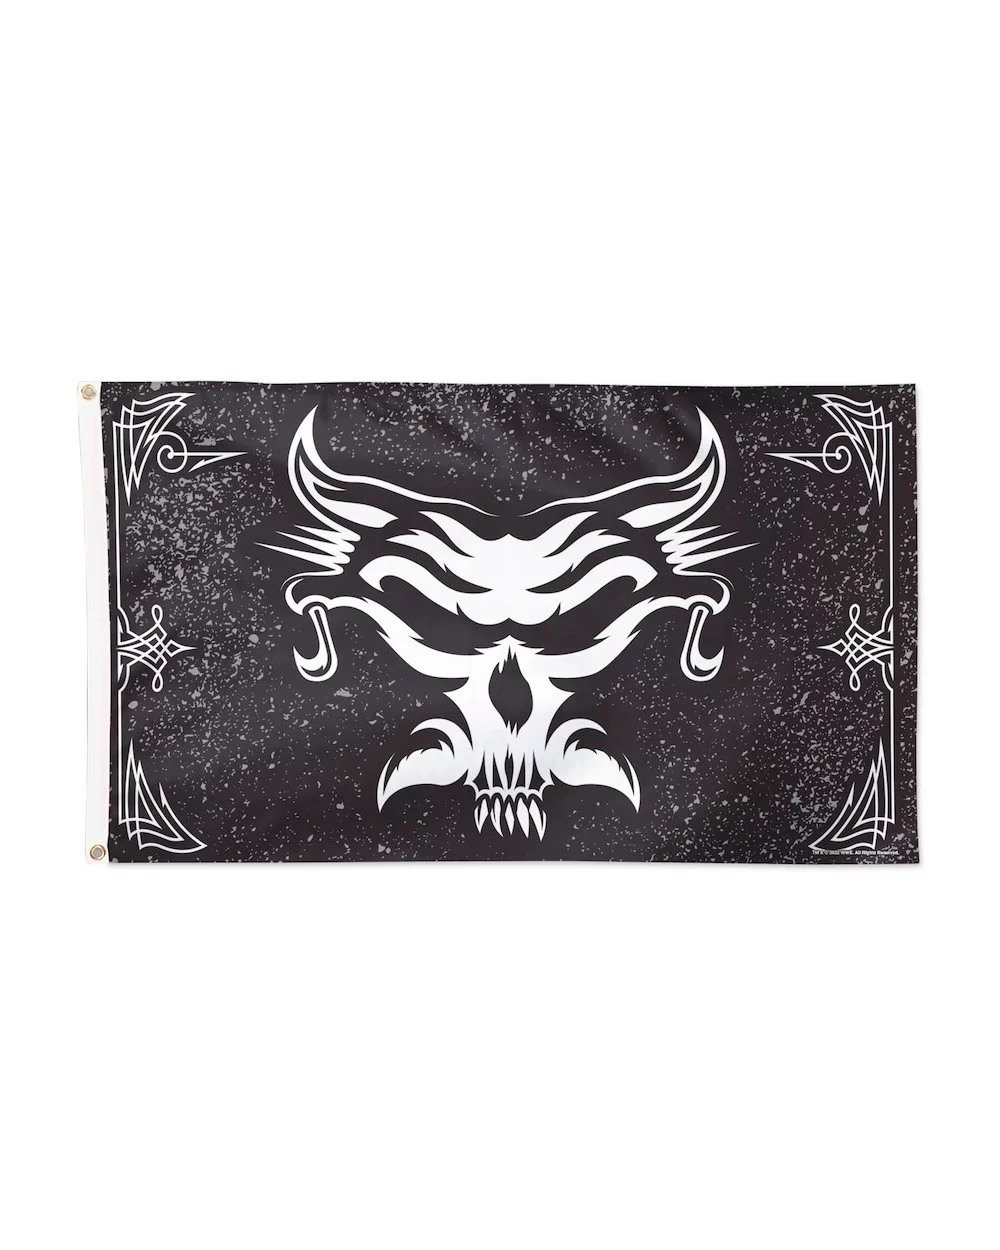 WinCraft Brock Lesnar 3' x 5' Single-Sided Flag $14.40 Home & Office